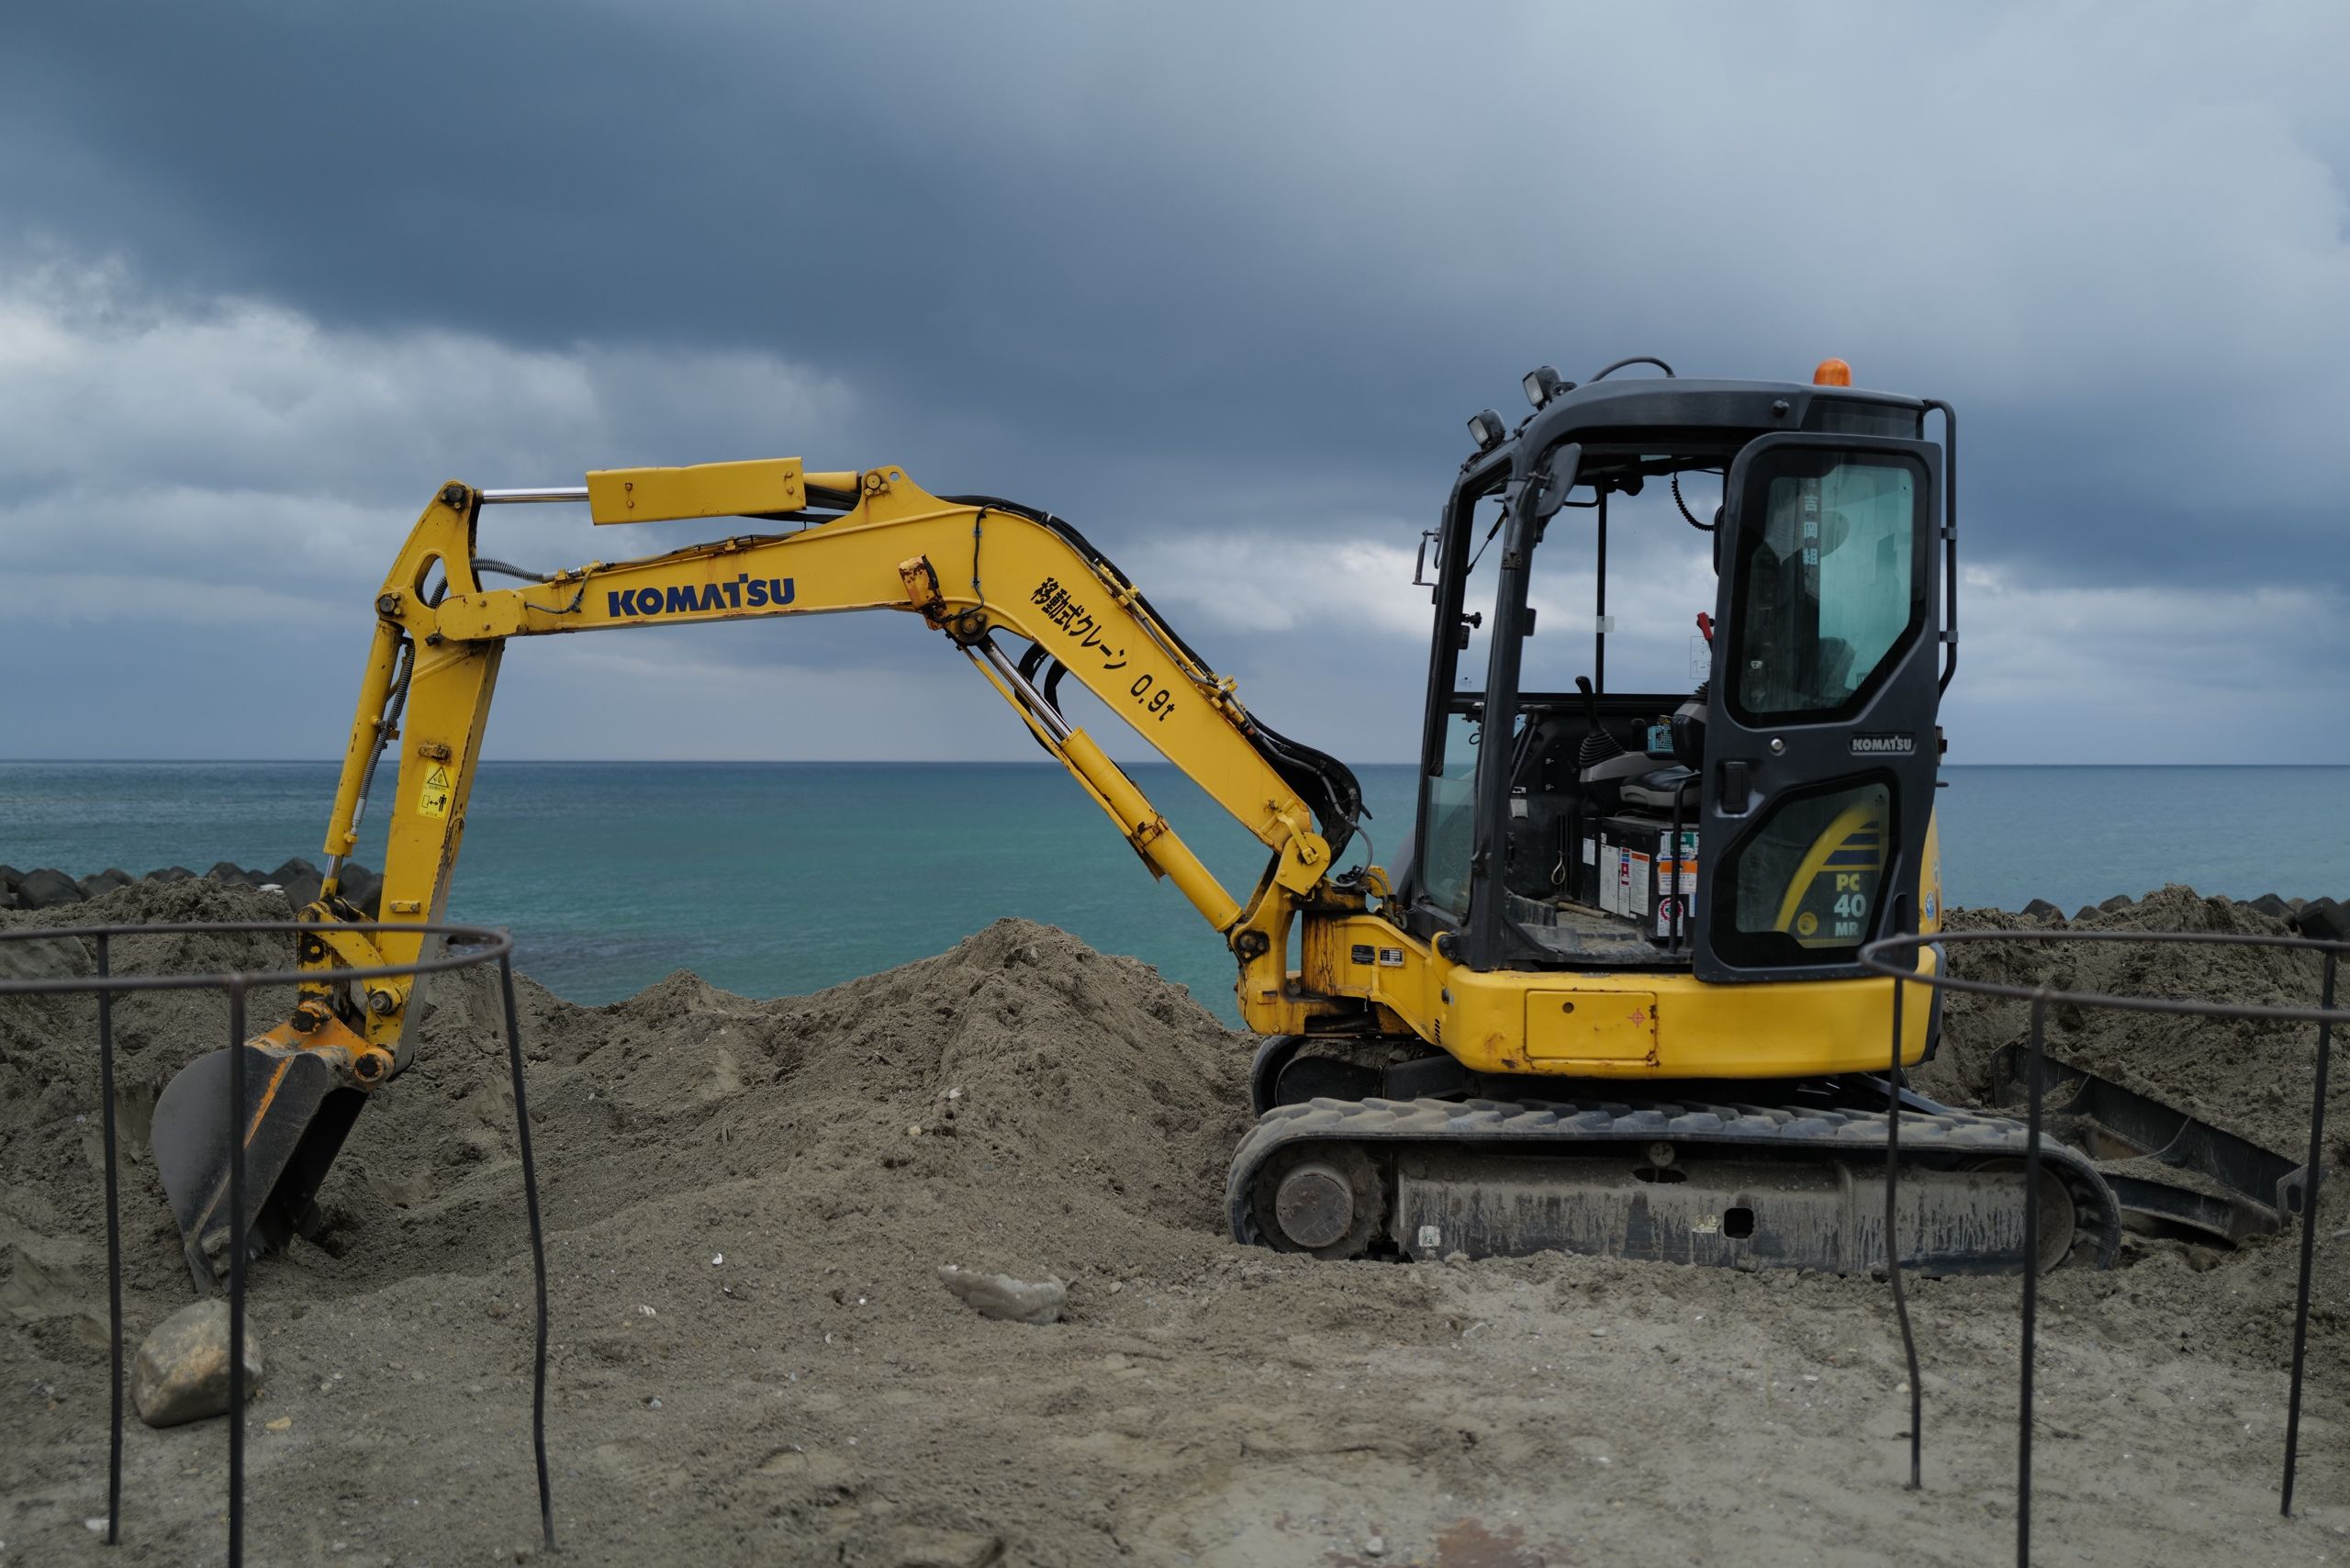 A small yellow excavator stands on a beach under dramatic clouds